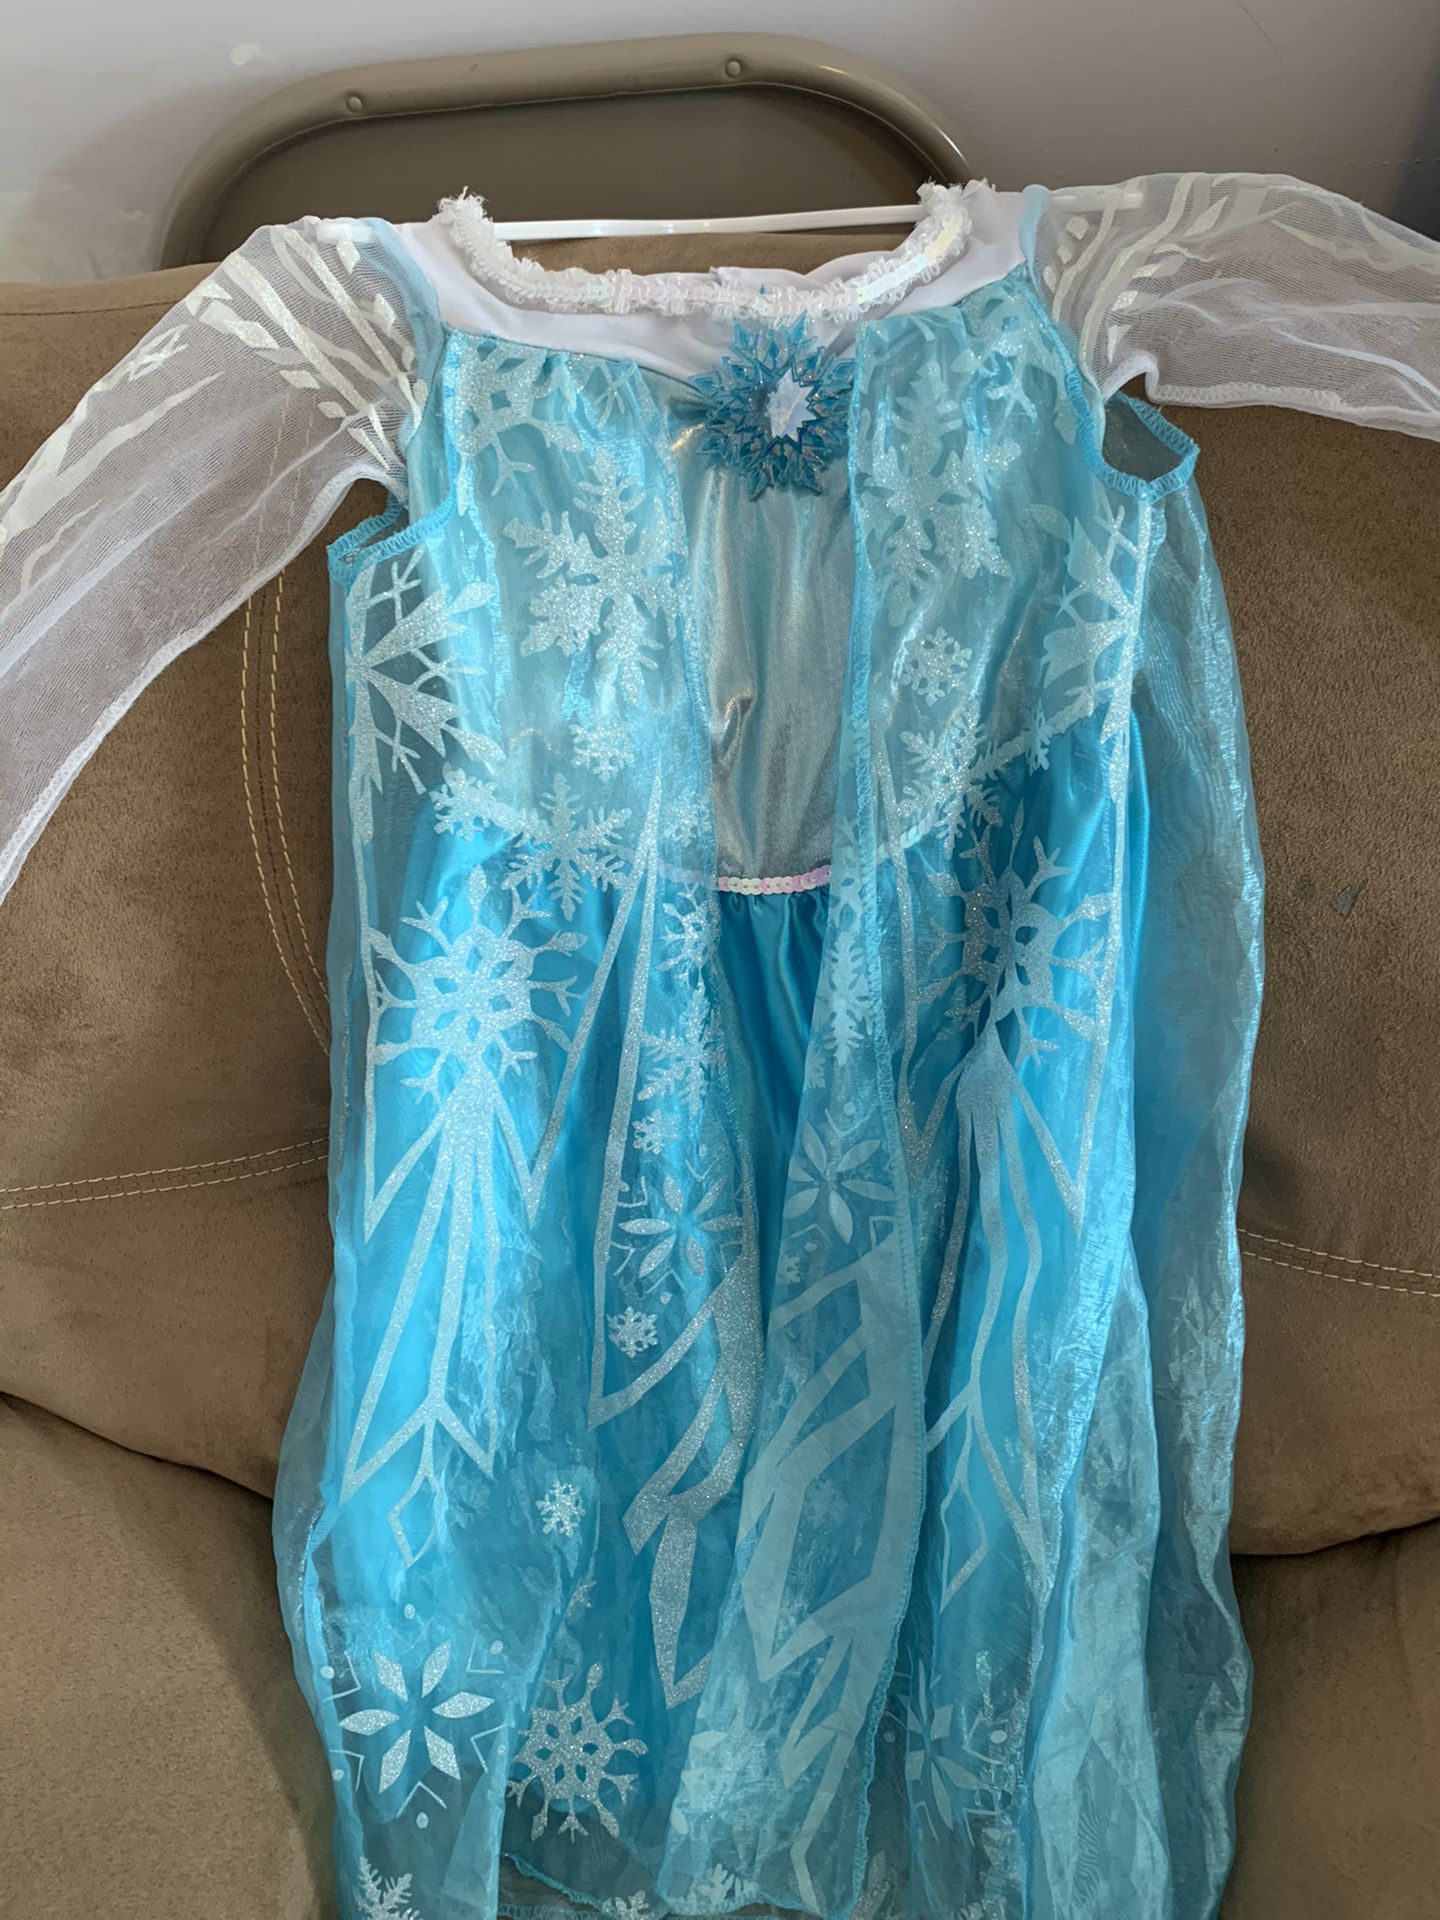 Halloween or another occasion Frozen dress size small